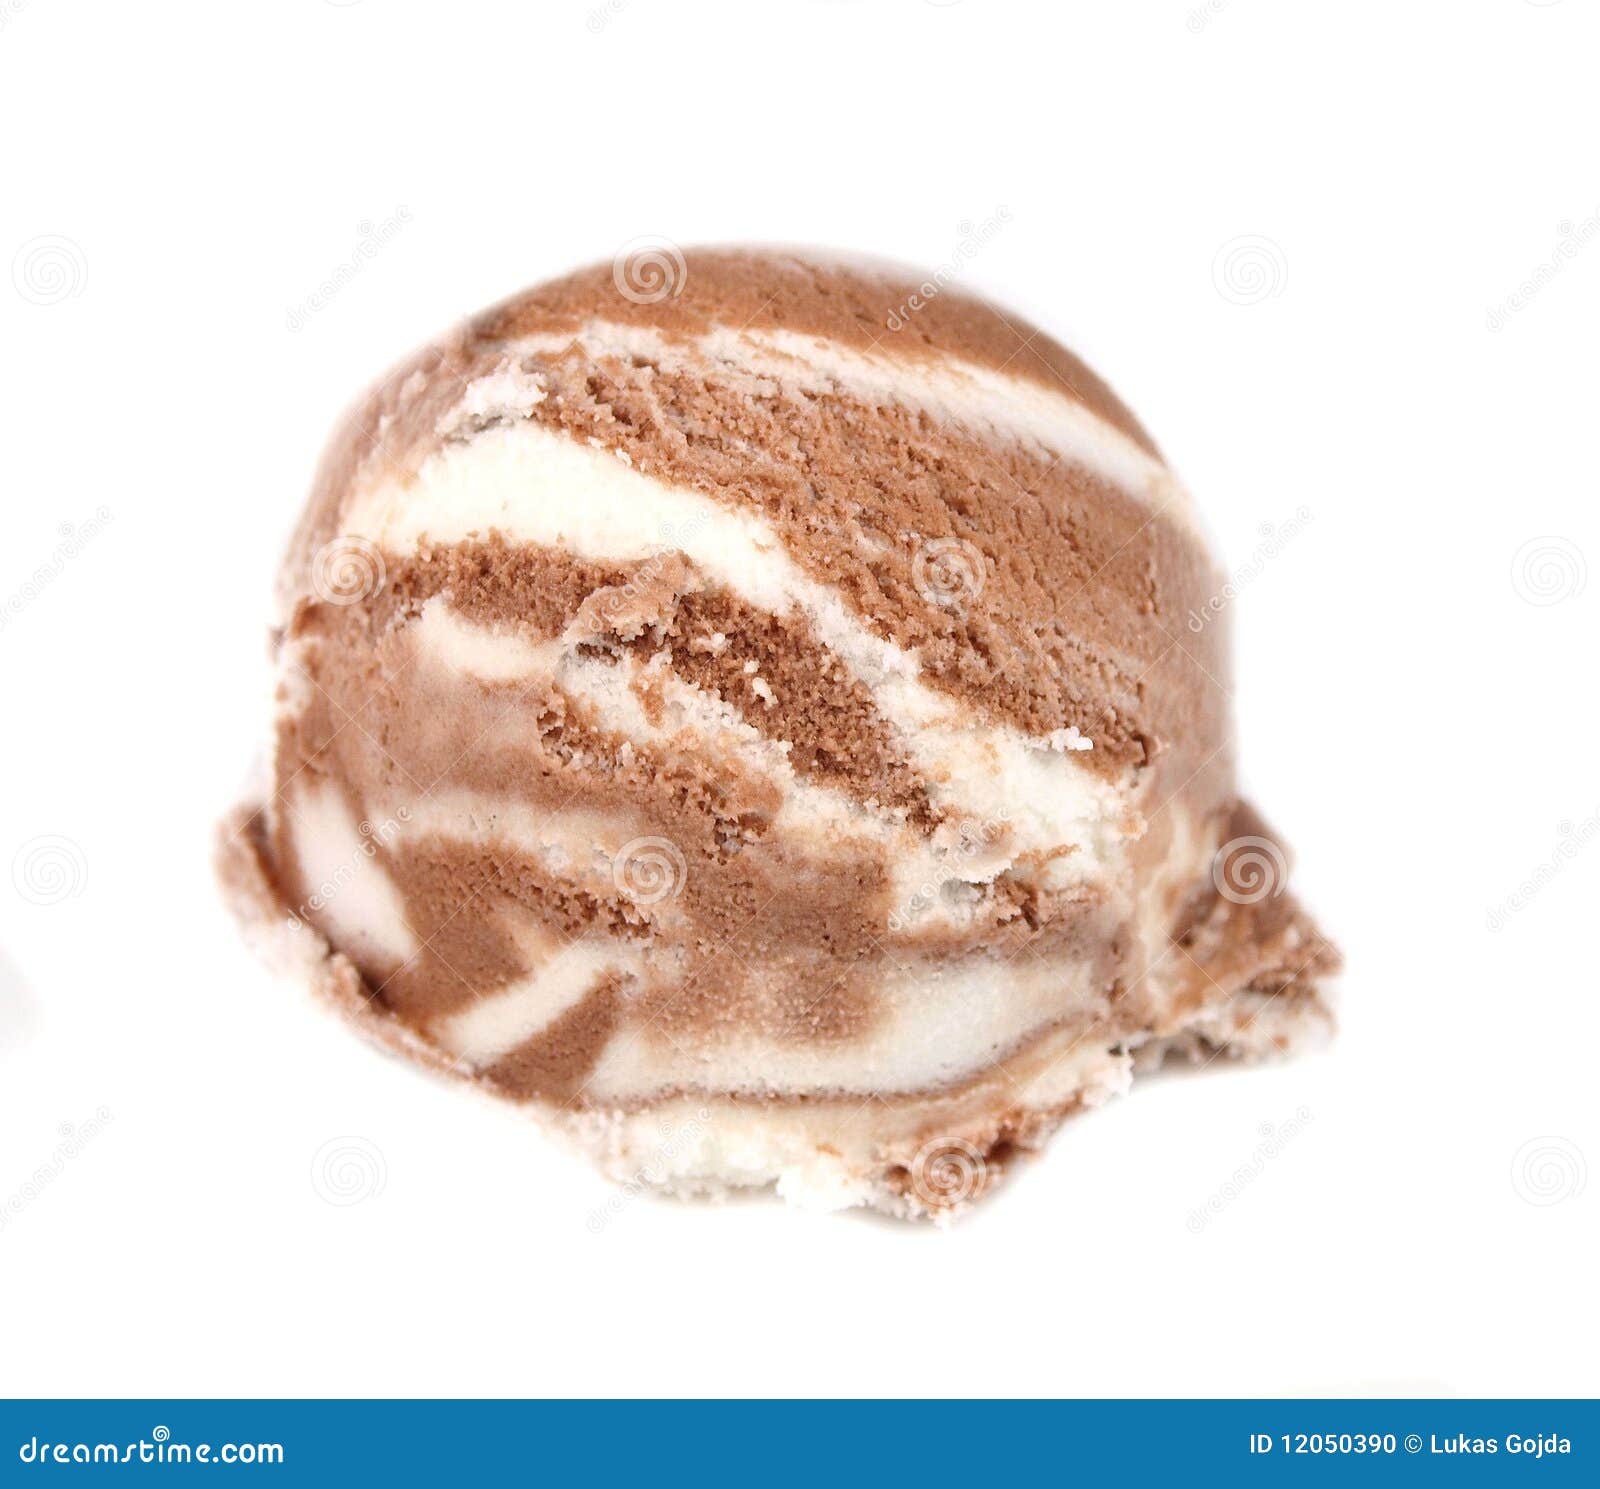 112+ Thousand Chocolate Ice Cream Scoop Royalty-Free Images, Stock